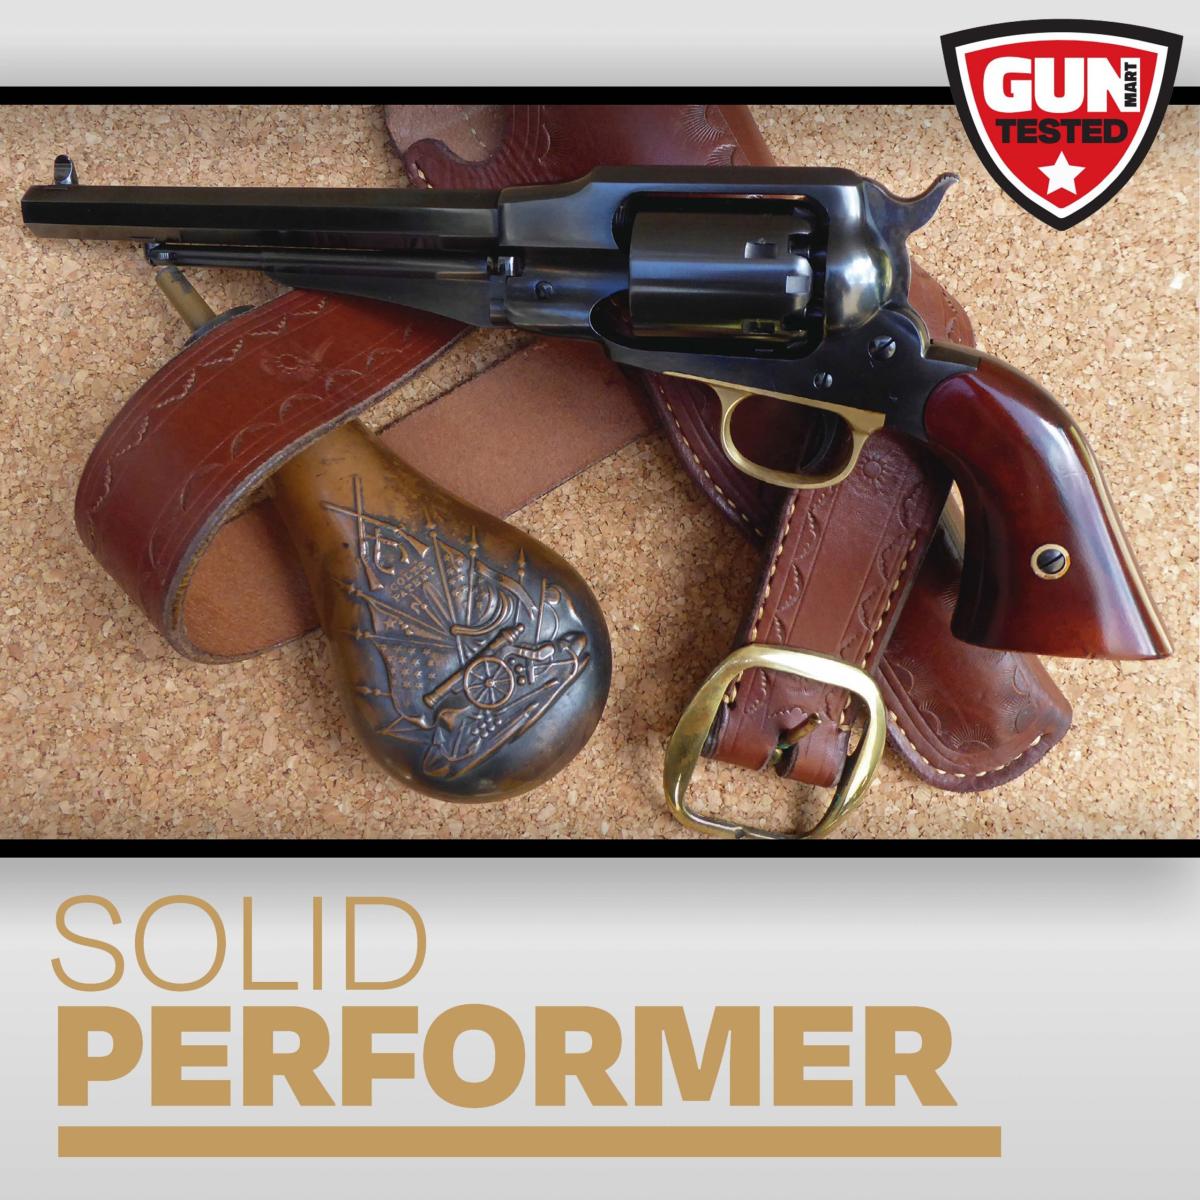 "Solid Performer" - Uberti Remington New Model Army Revolver Review